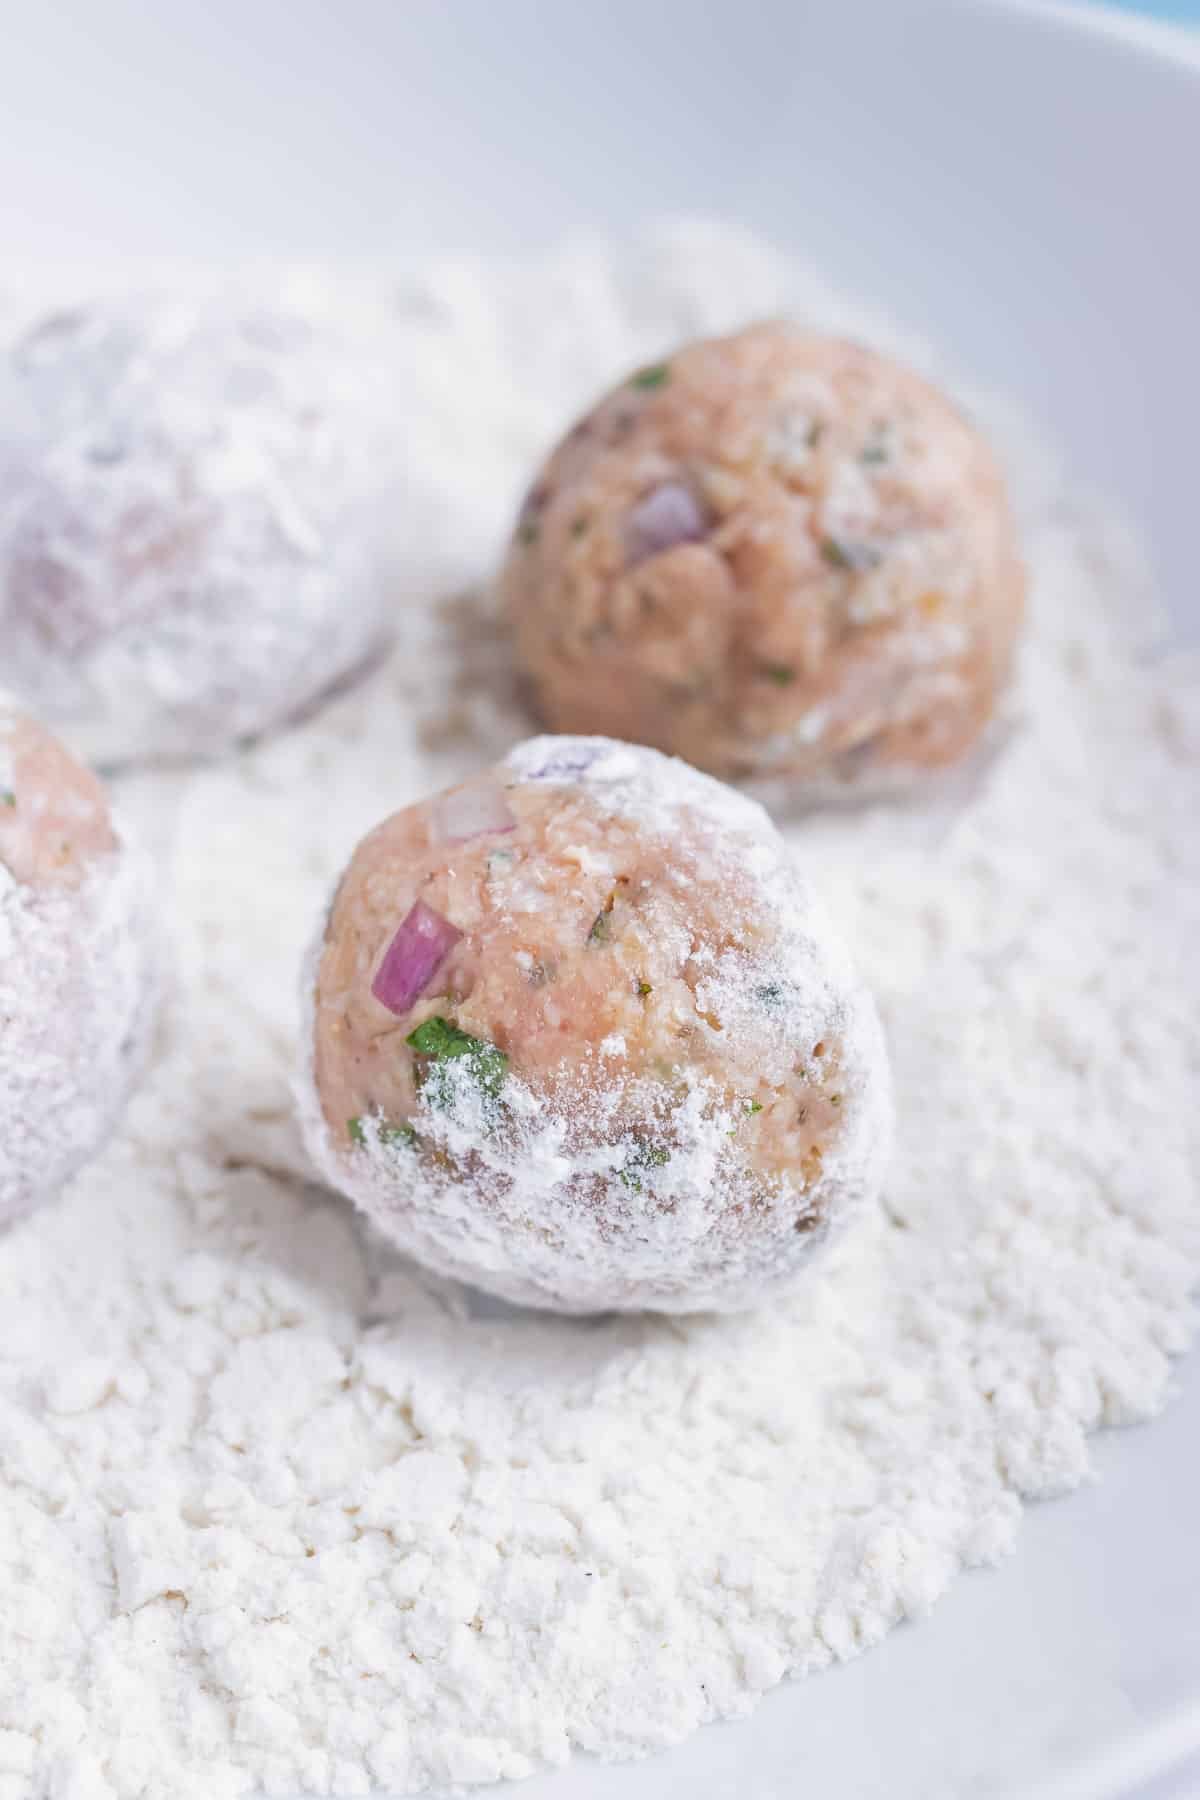 Greek turkey meatballs are rolled in a light layer of flour before being cooked.